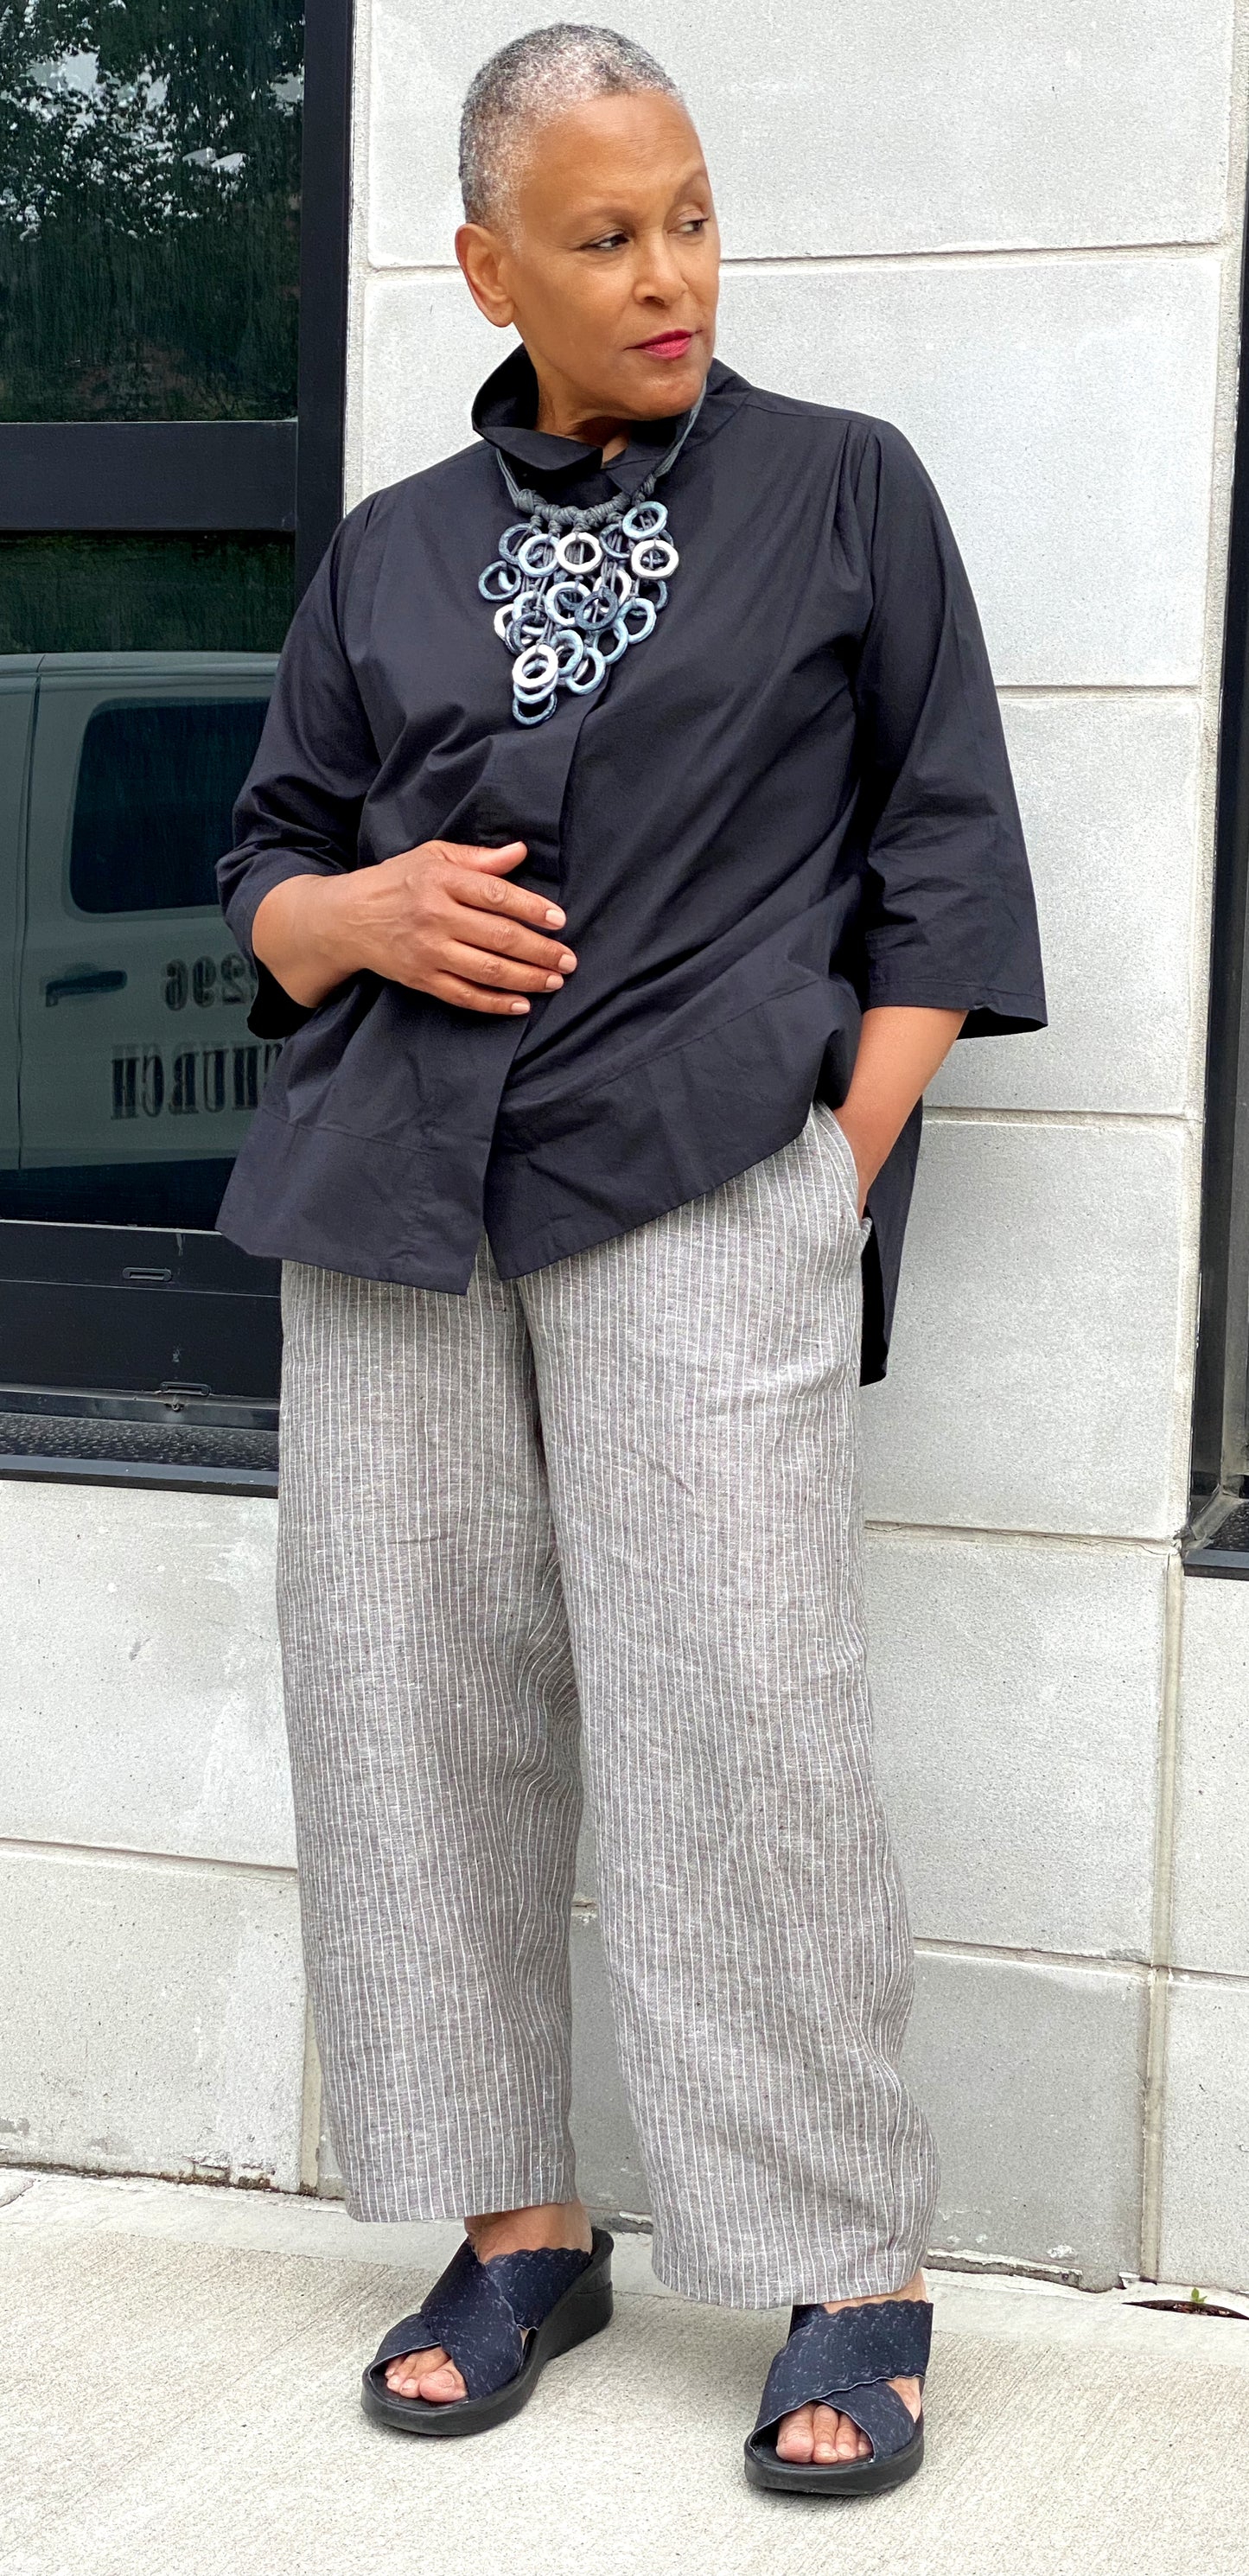 Stylish older woman stand on an city street wearing a black button down shirt, a statement necklace and a linen grey pinstripe full cut pant.